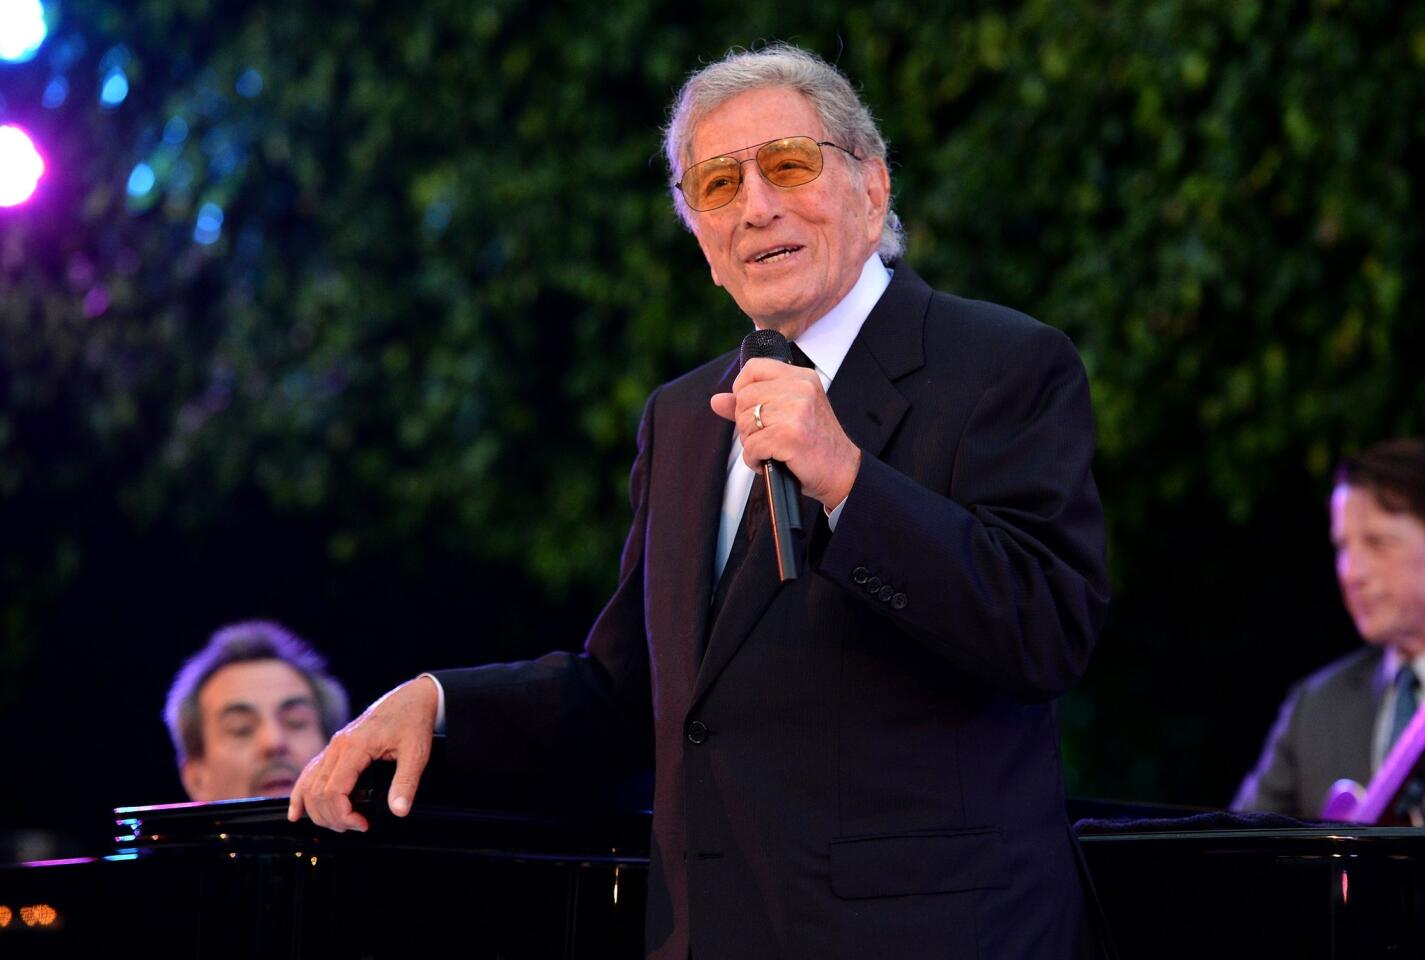 Tony Bennett will return to Ravinia at 8:30 p.m. Aug. 16 to perform in the Pavilion.